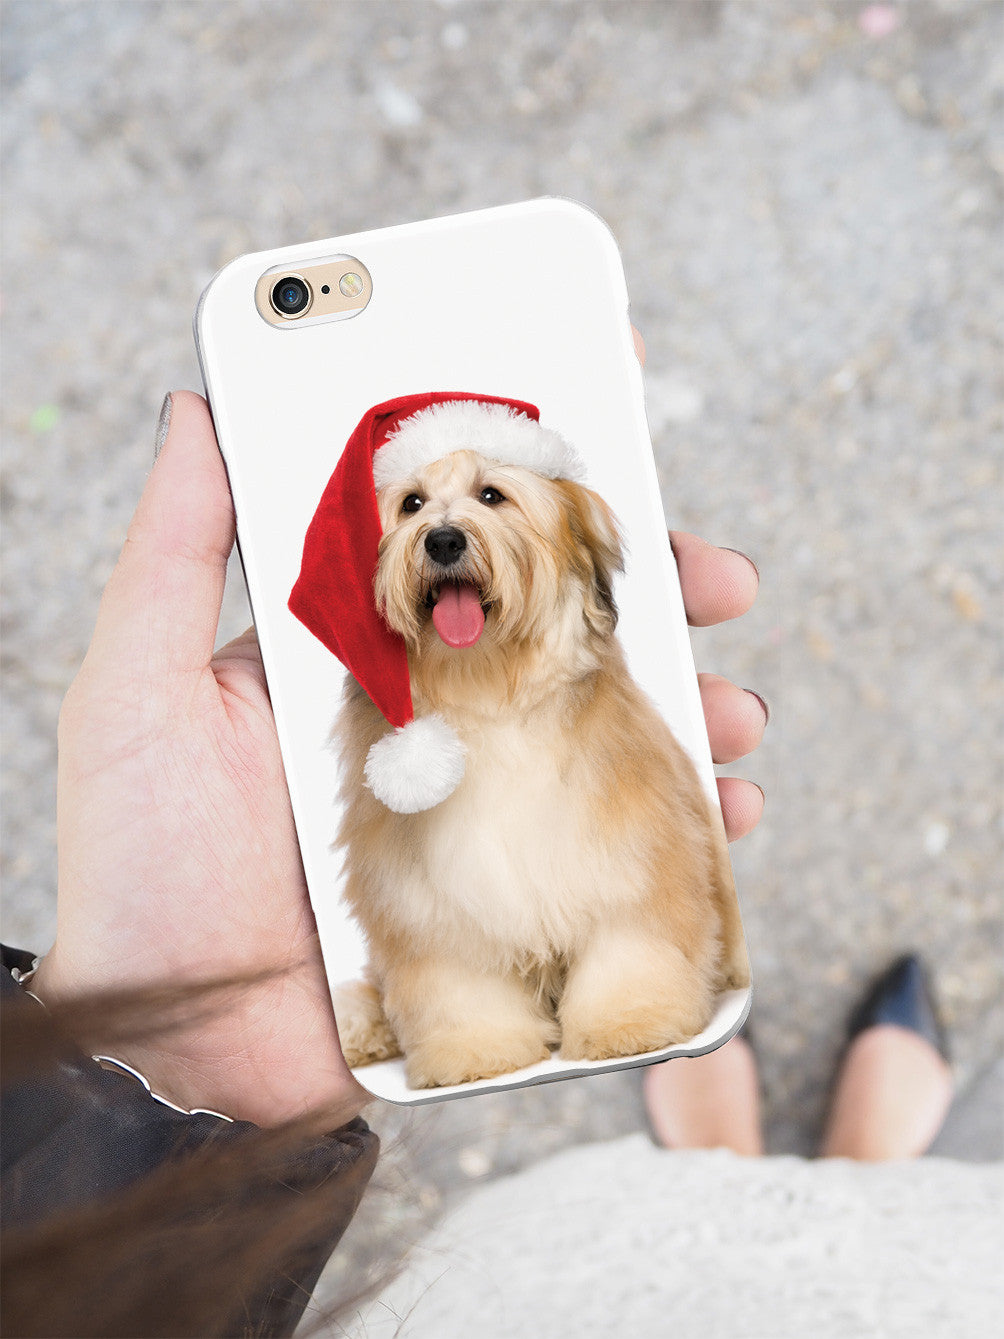 Jolly Bichon with Christmas Hat Case